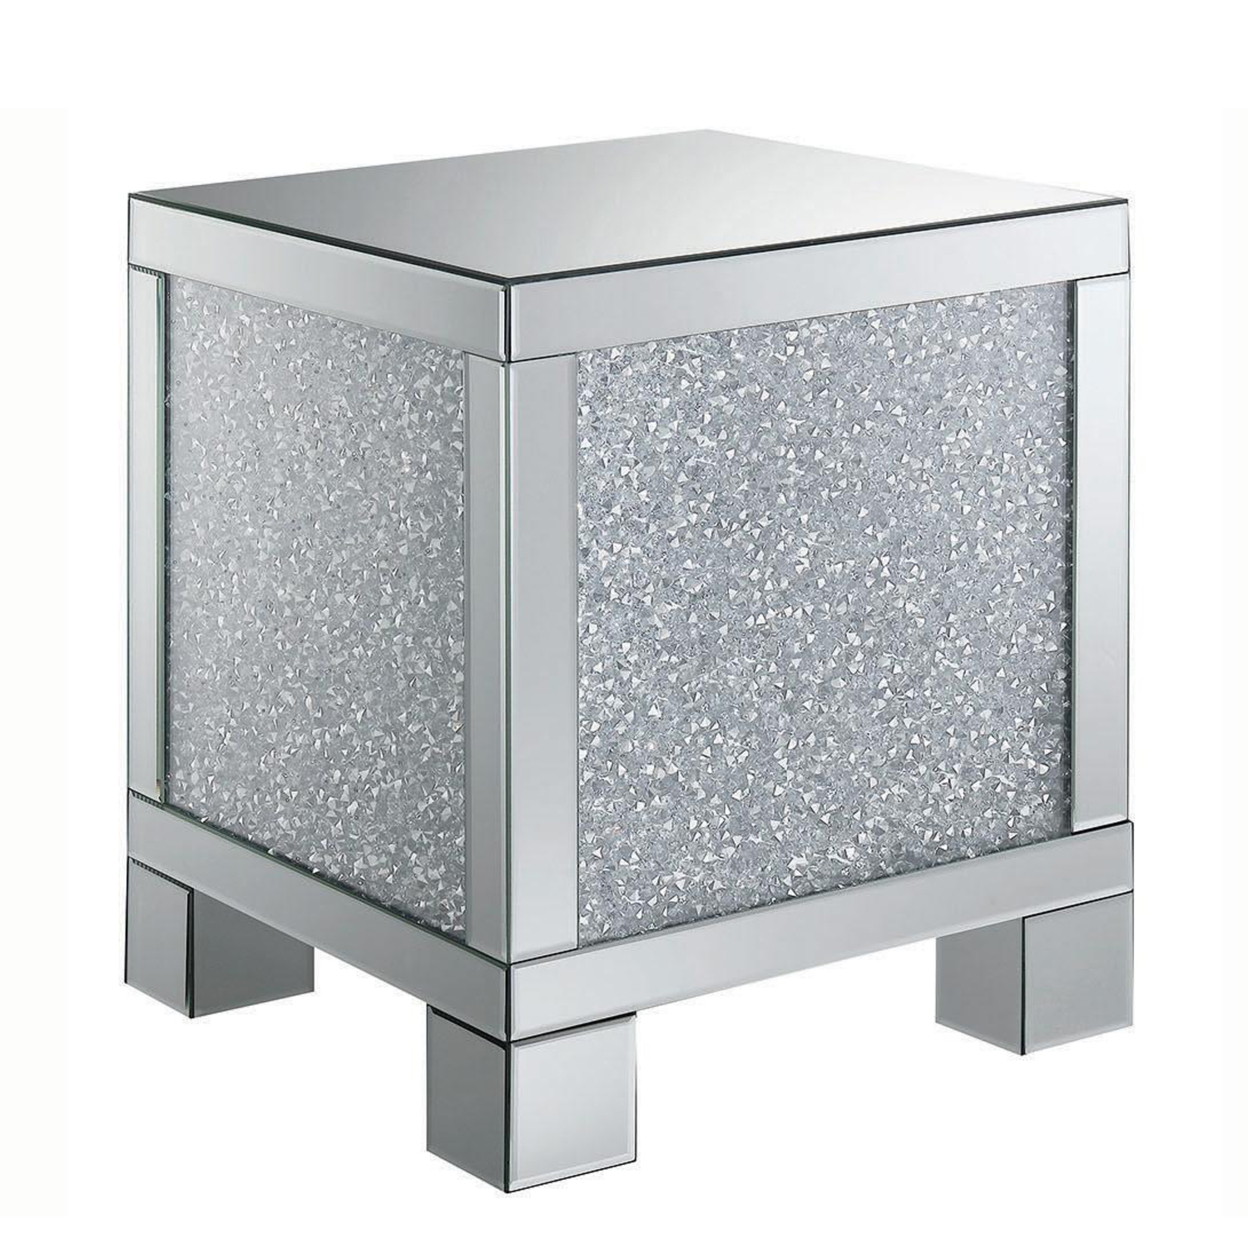 Wooden End Table With Infused Crystals On Mirrored Panel, Silver And Clear- Saltoro Sherpi